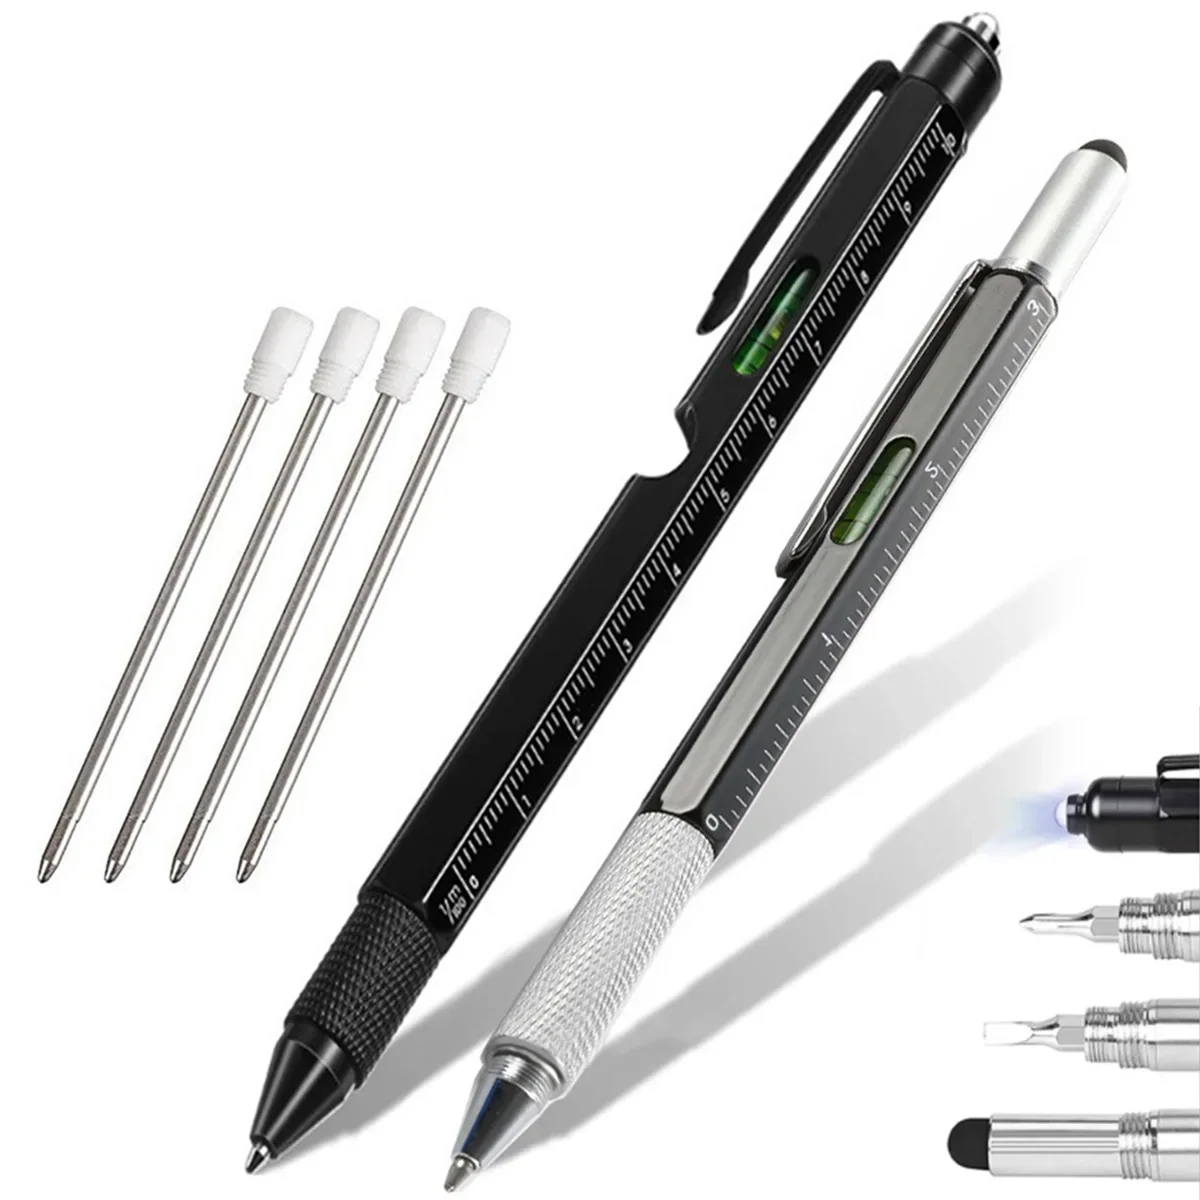 

2pcs All In 1 Ballpoint Pen Multi Tool with Ruler Level Cross Flat Head Screwdriver Touch Multitool Pen Woodworkers